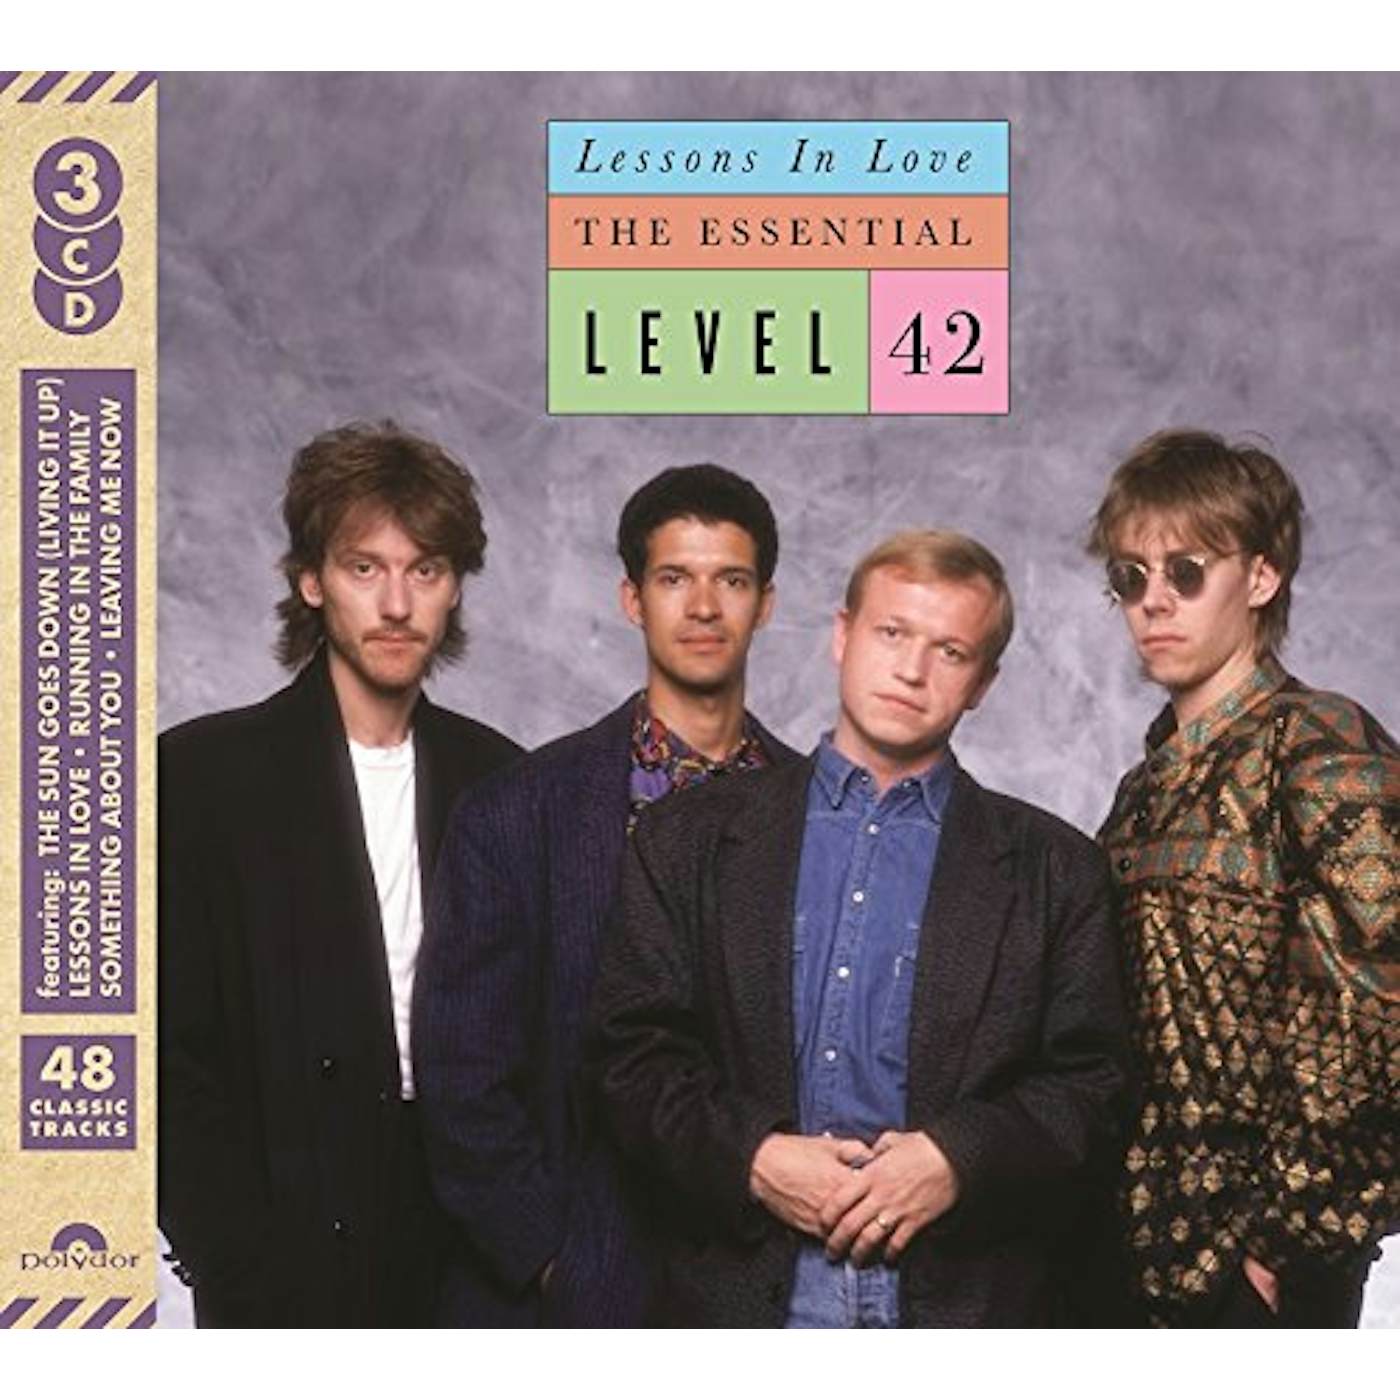 LESSONS IN LOVE: ESSENTIAL LEVEL 42 CD